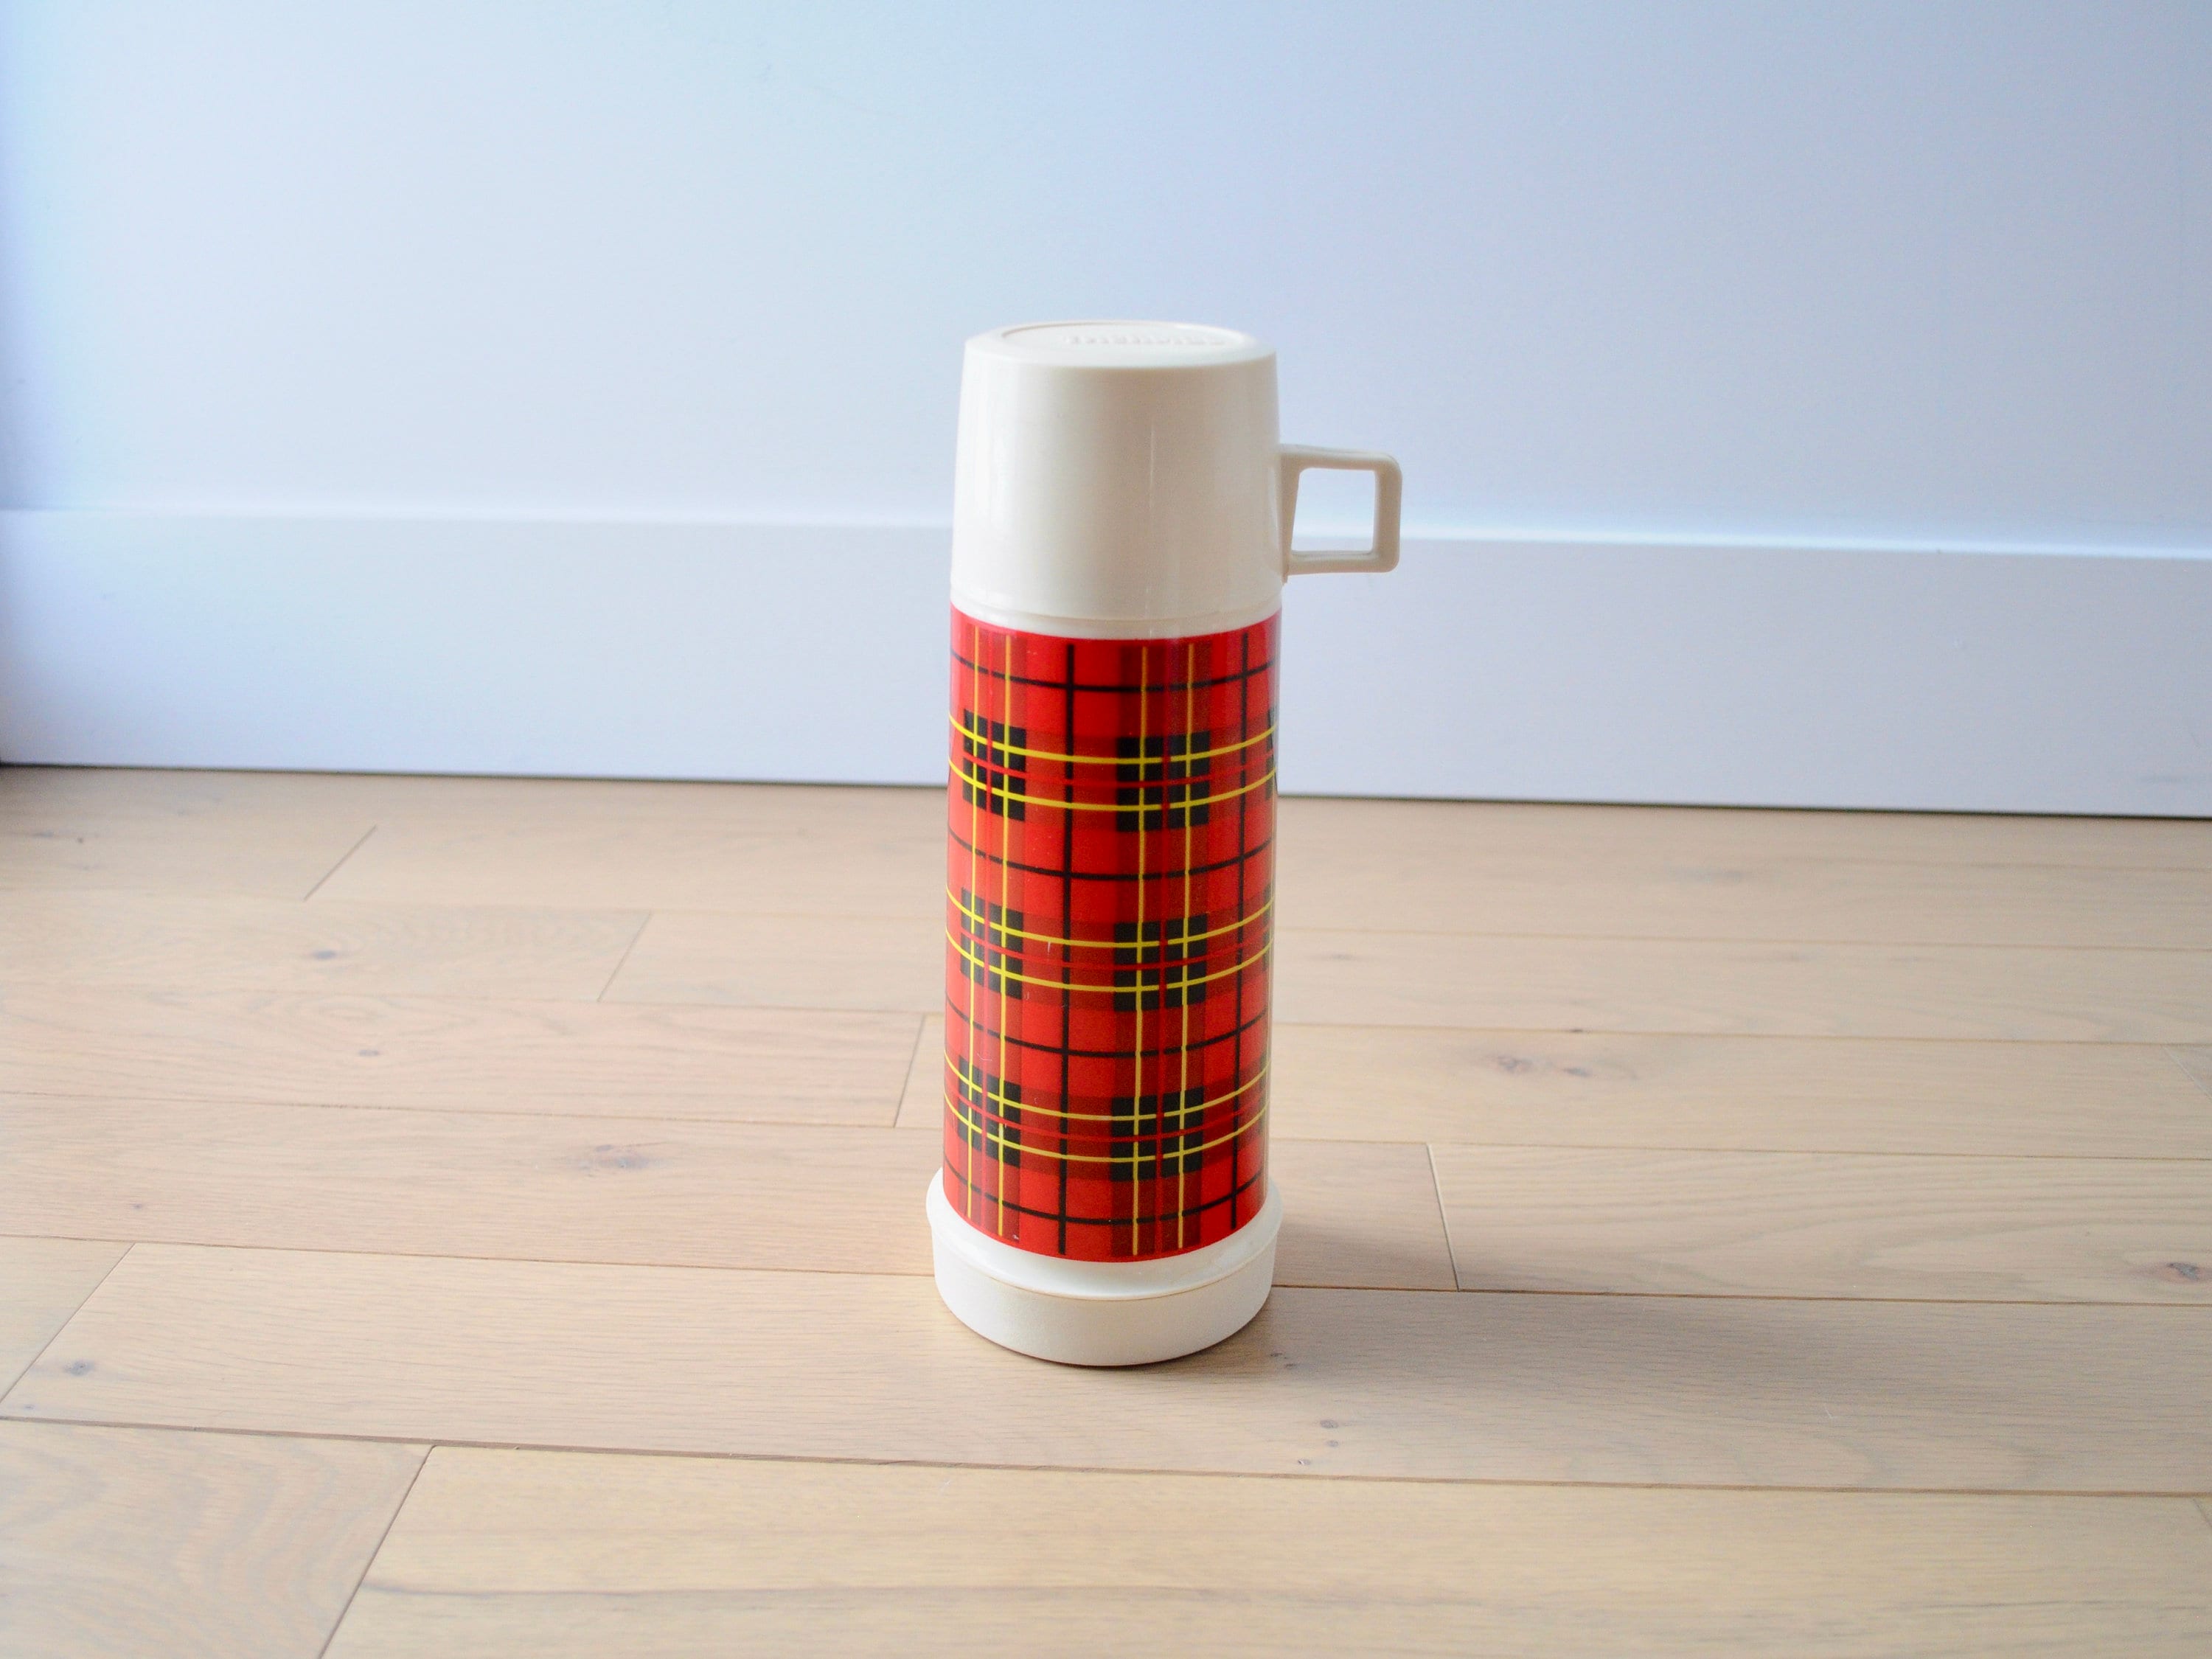 Thermos 6402 Orange and Cream Made in Canada 32 Oz Vintage Camping